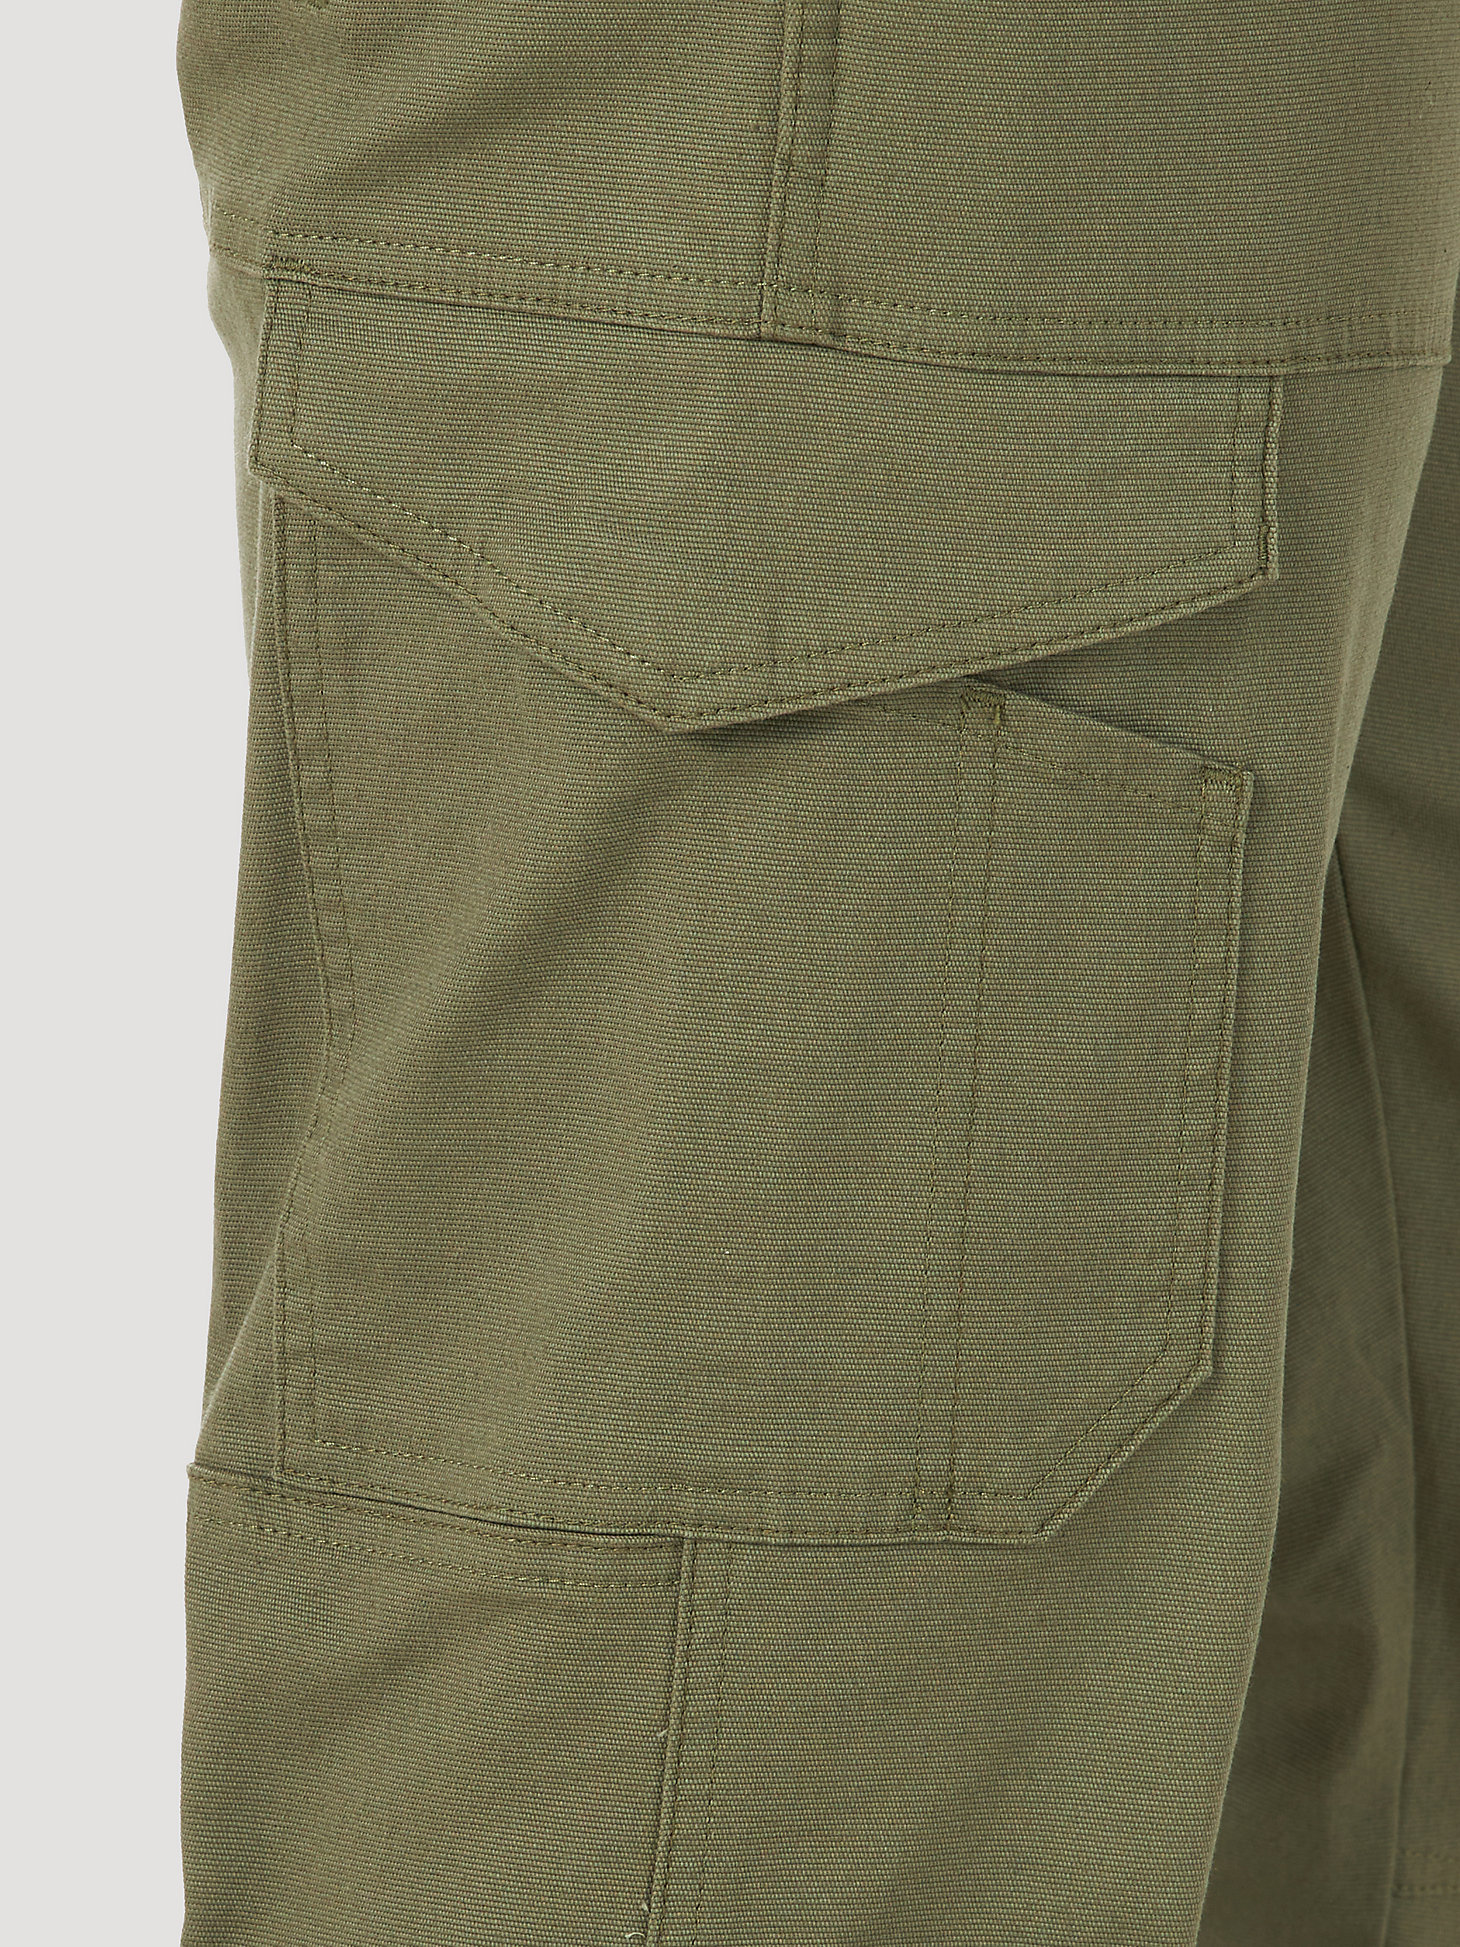 ATG by Wrangler™ Men's Canvas Cargo Pant in Industrial Green alternative view 7